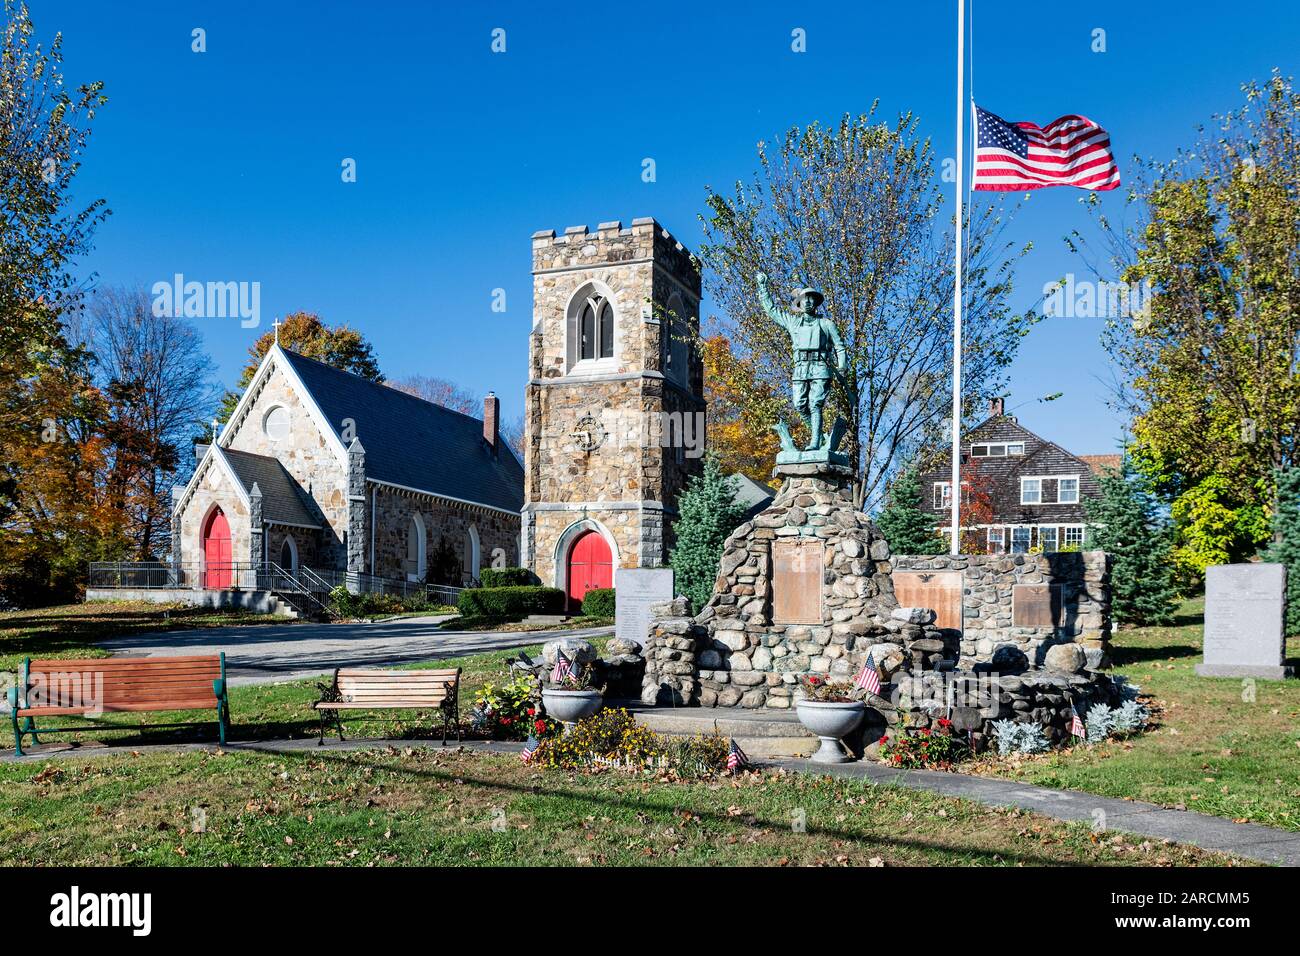 Charming New England town of Canaan. Stock Photo